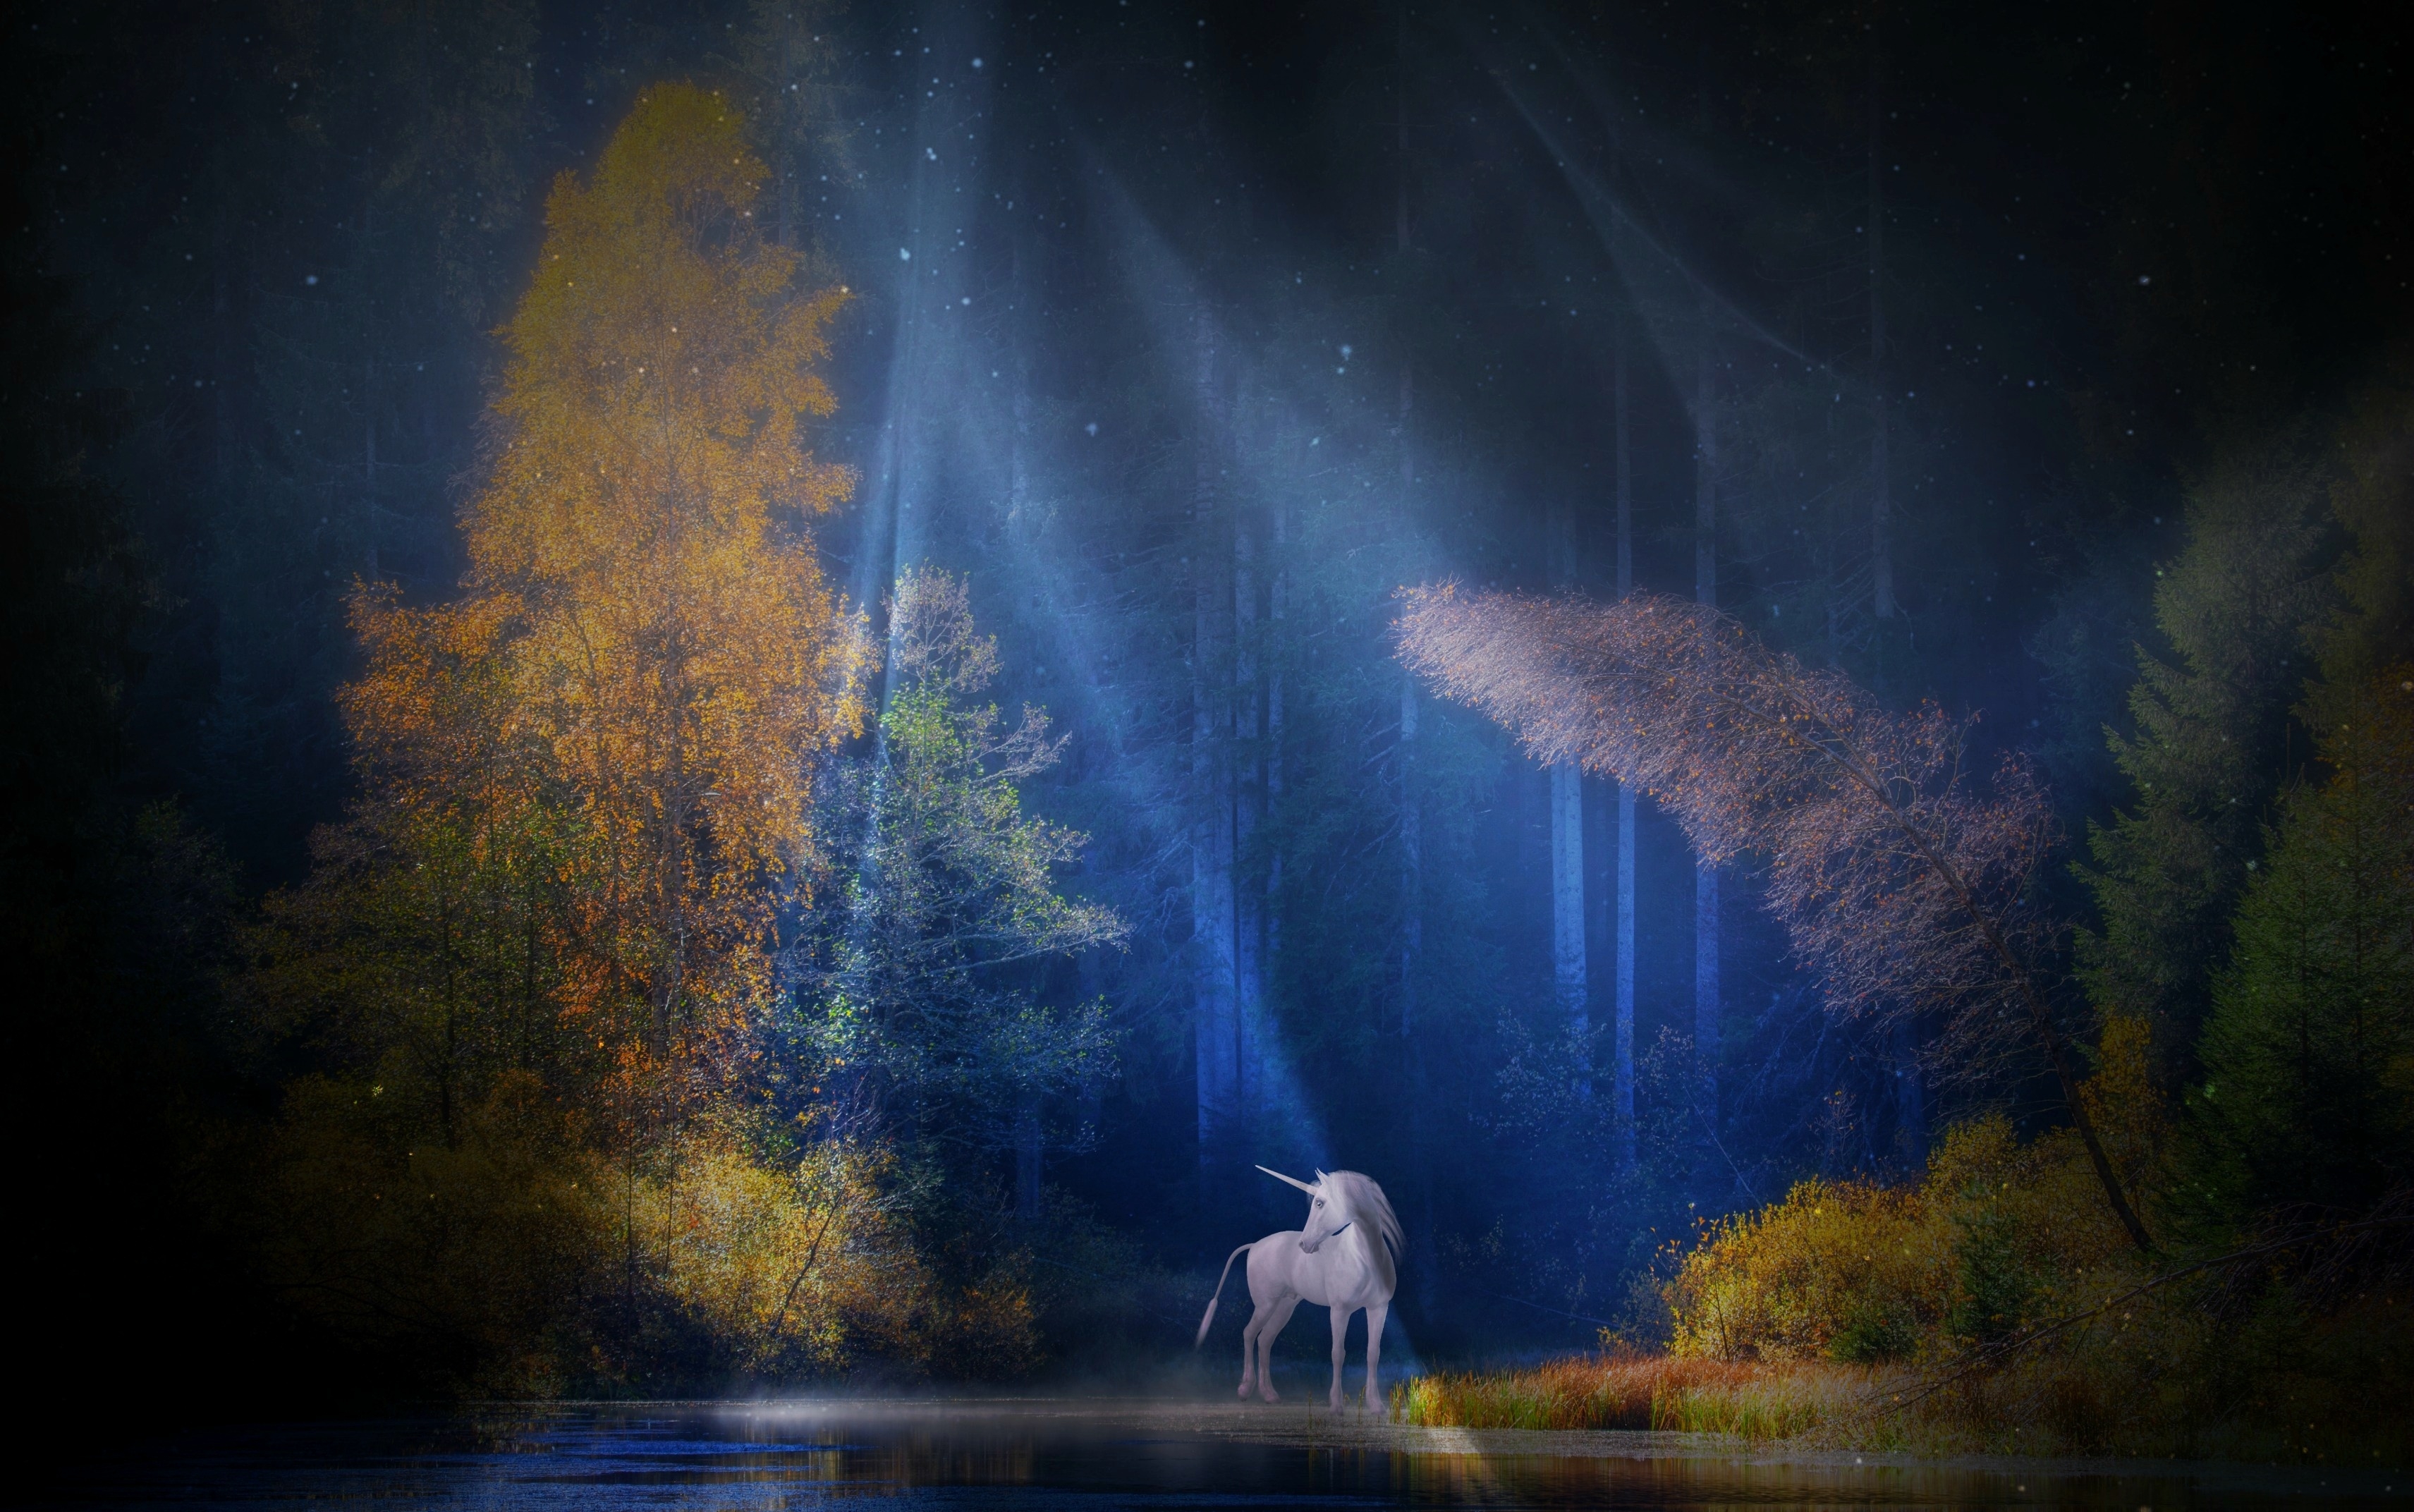 HD wallpaper, Woods, Fairy Tale, Mythical, Light Beam, Unicorn, Scenery, Tall Trees, Forest, Water